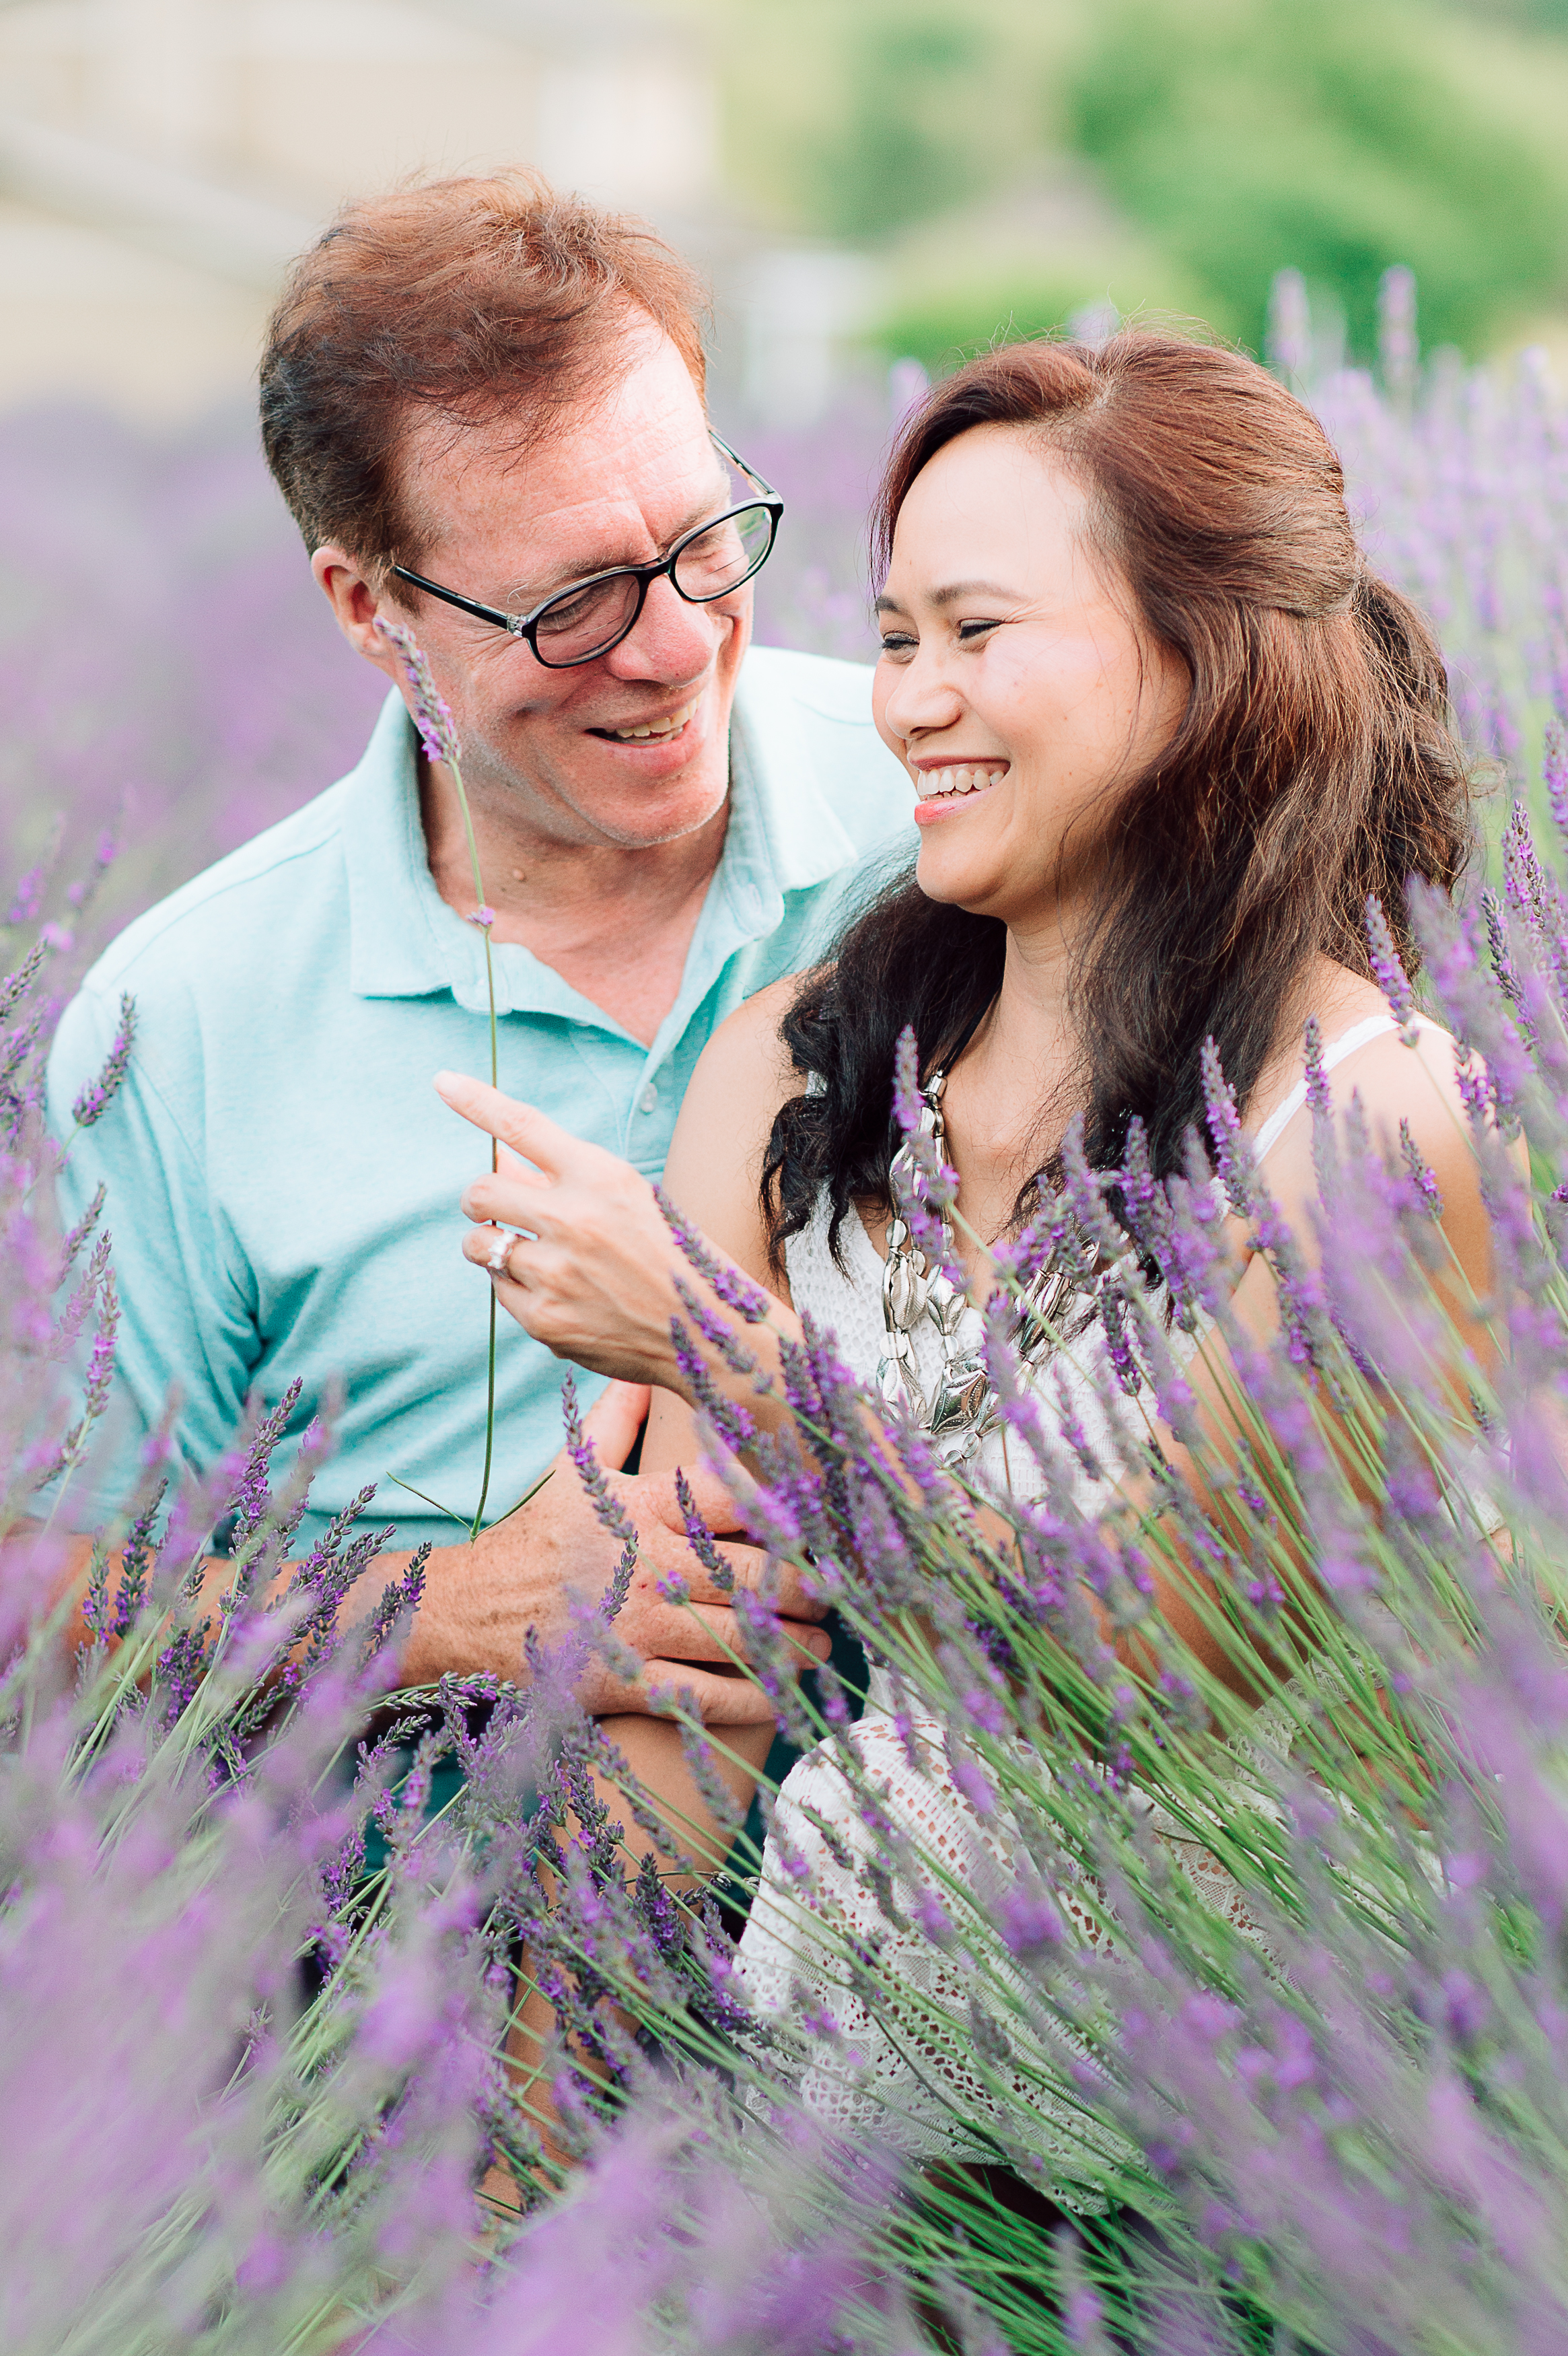 engagement_lavenderfield_youseephotography_LidiaOtto (33).jpg